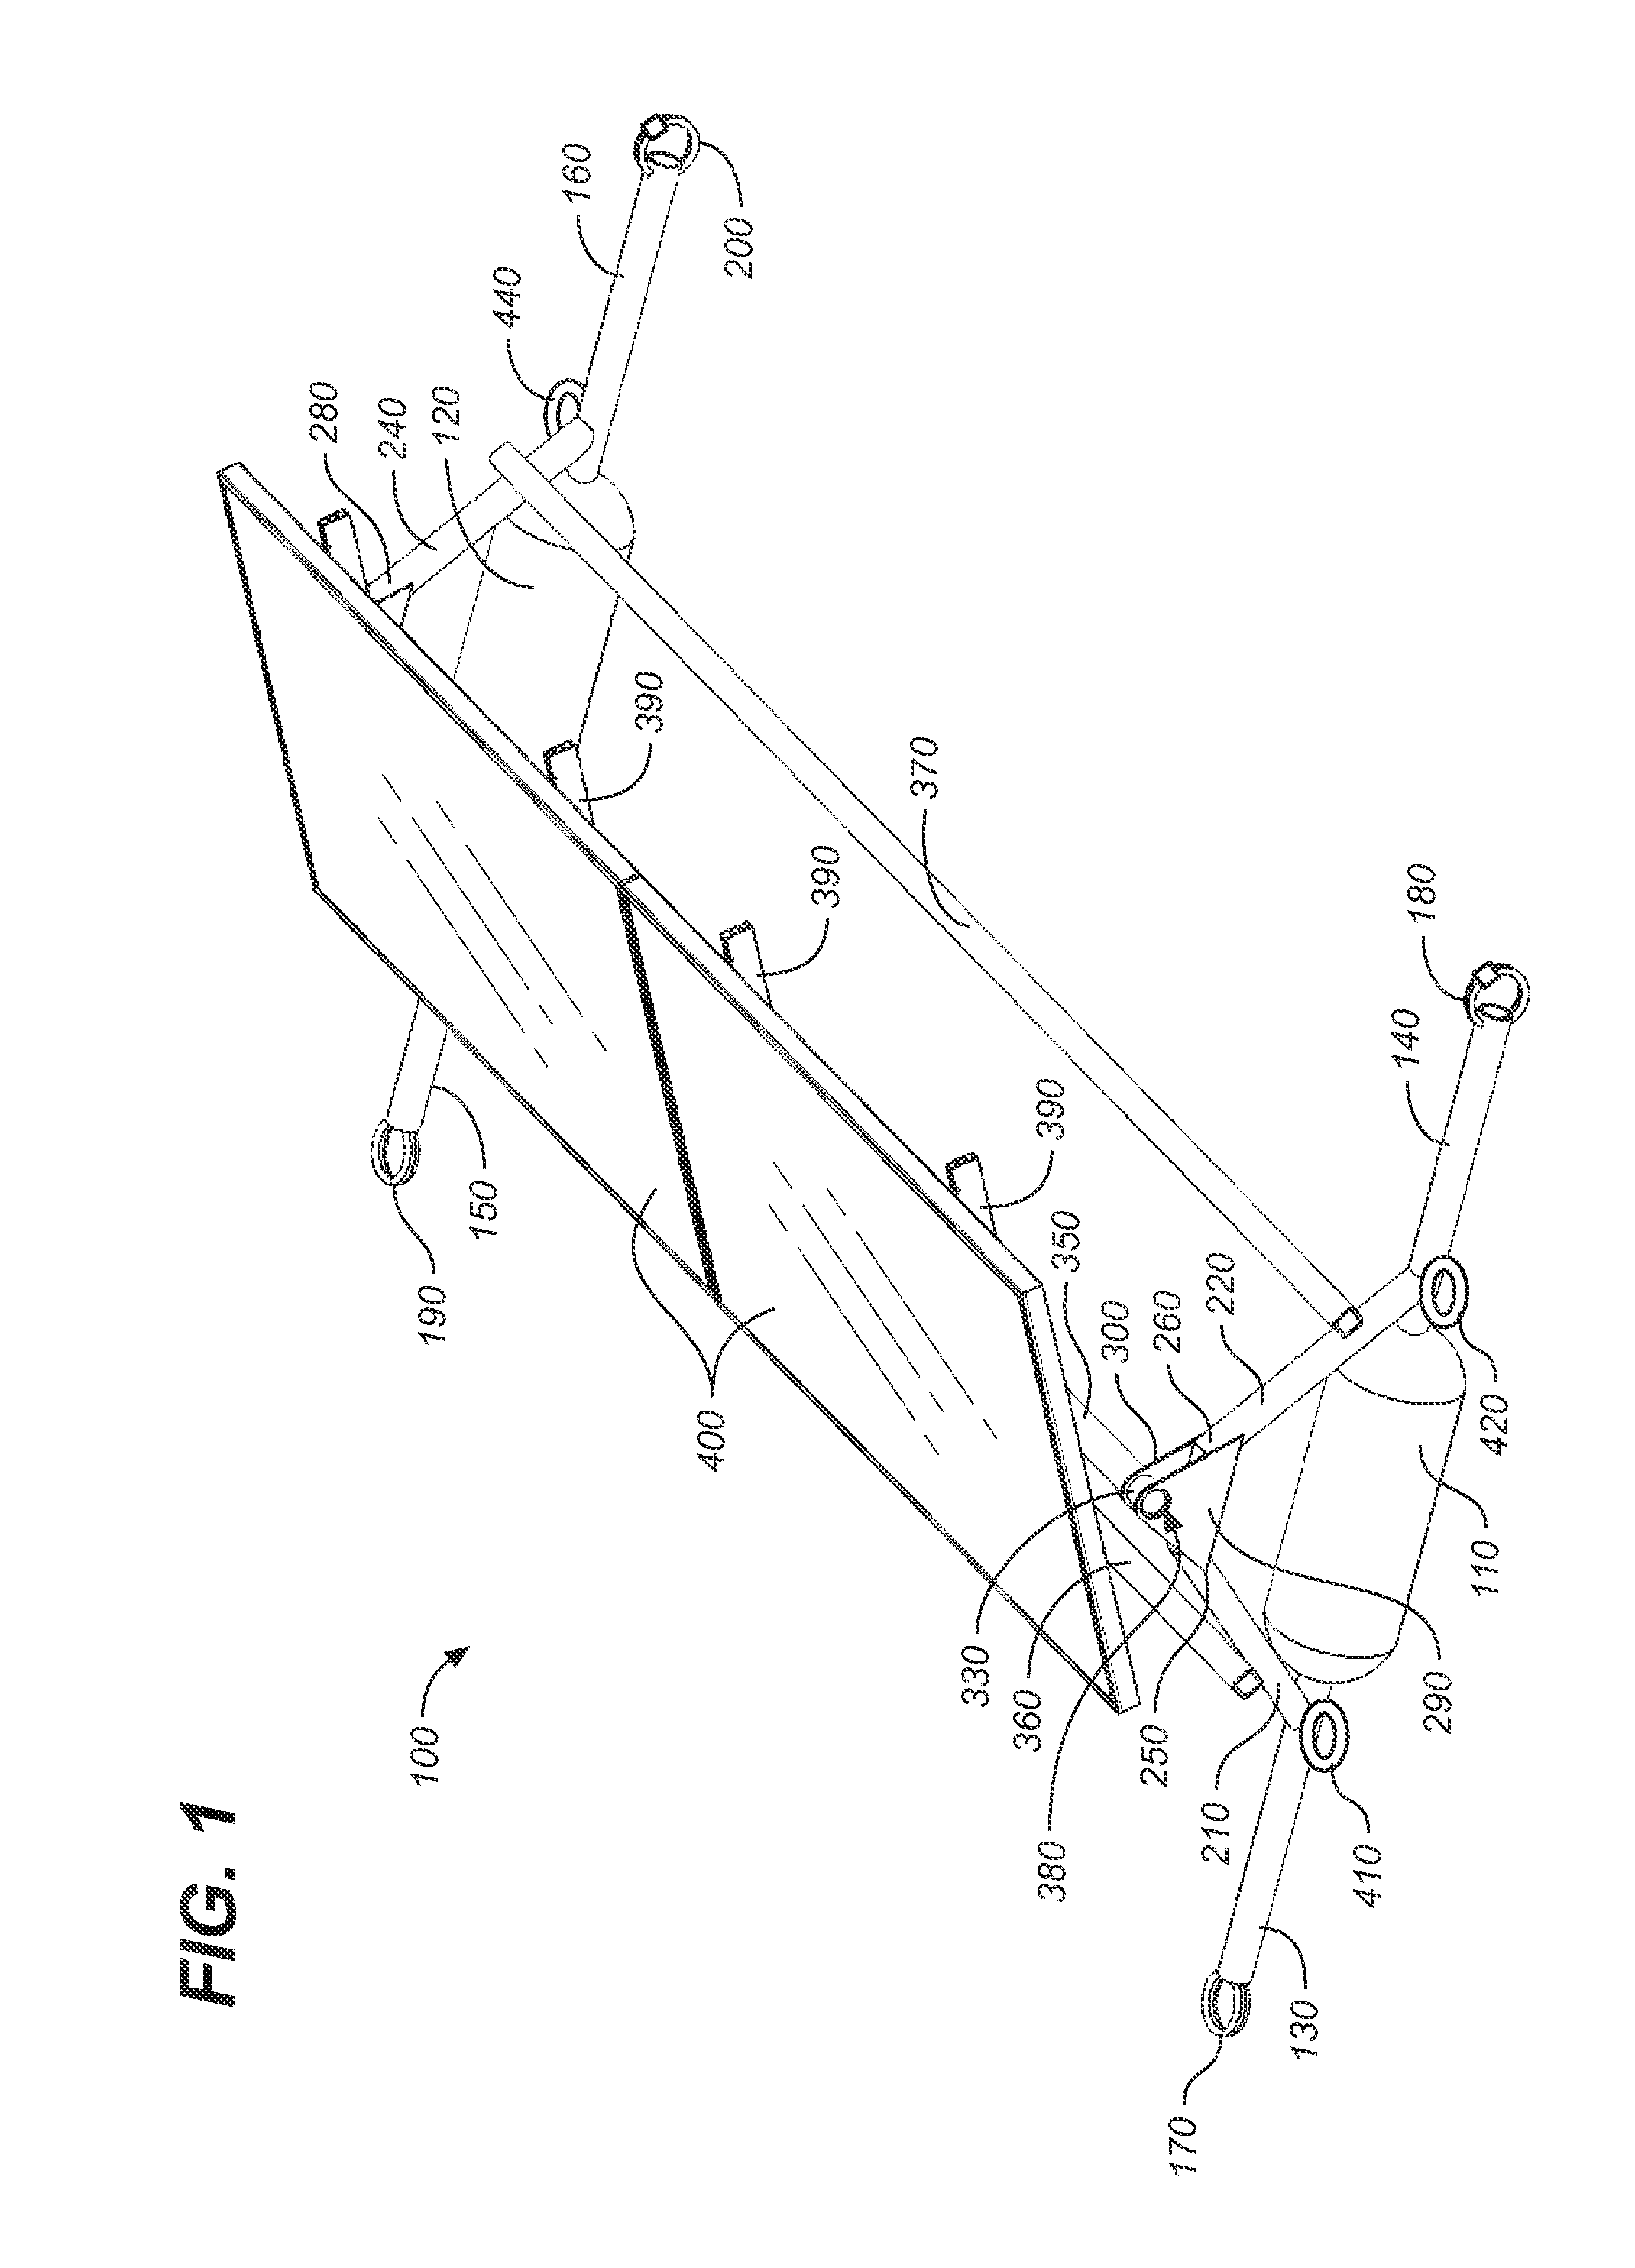 Floating support structure for a solar panel array